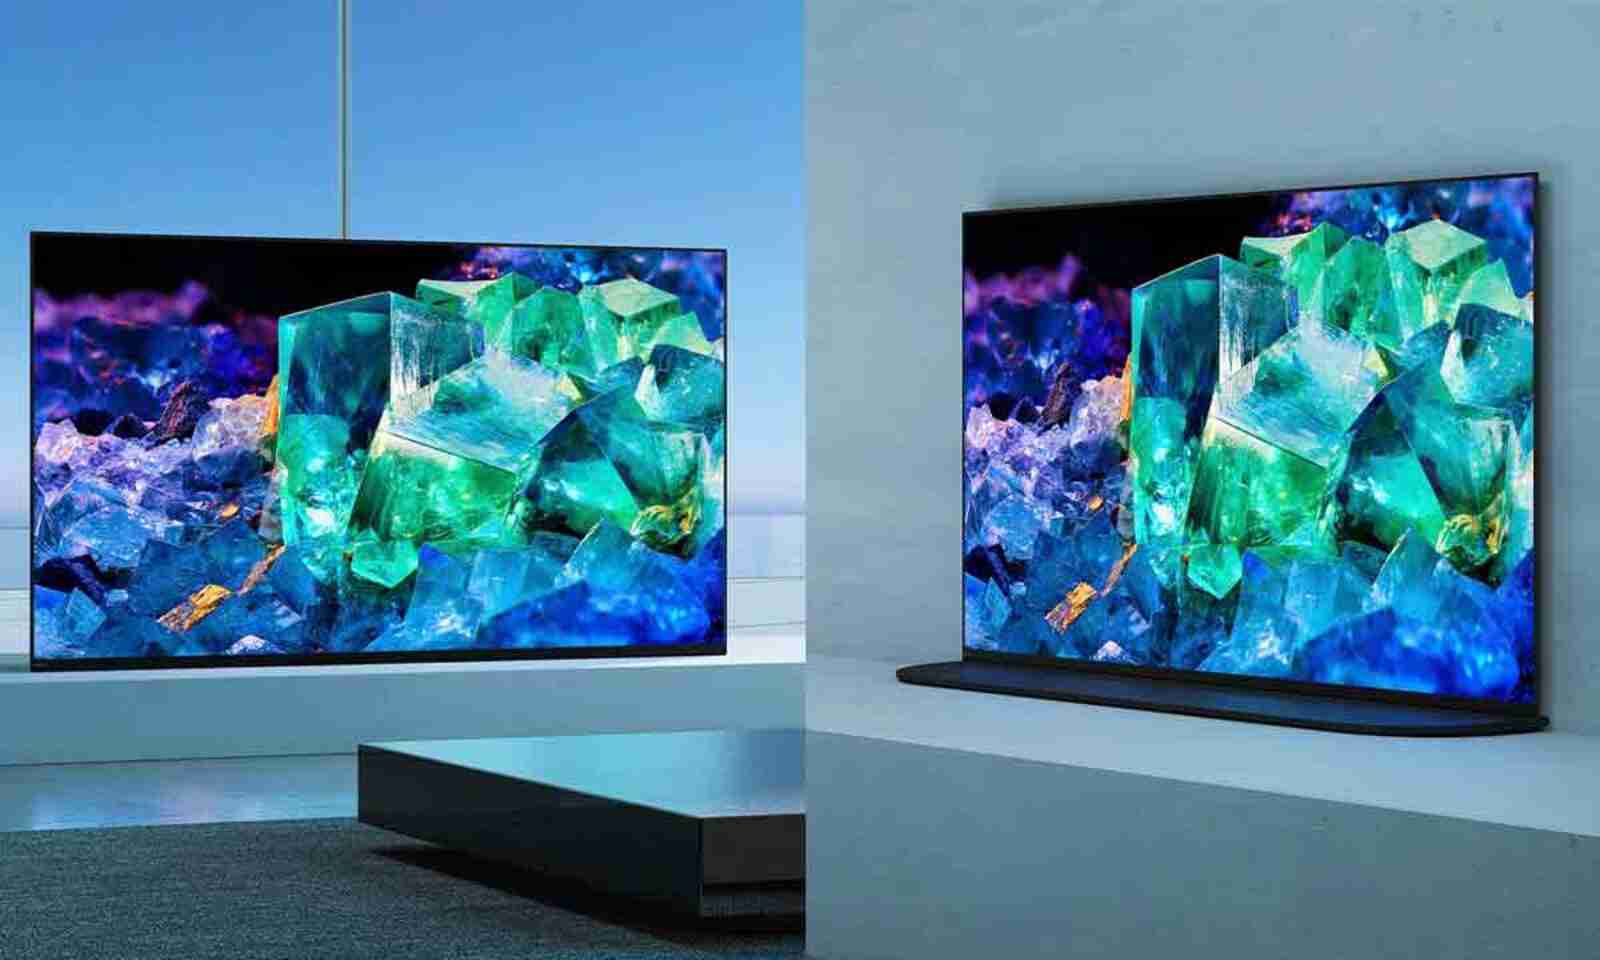 There are several factors to look for while buying TVs